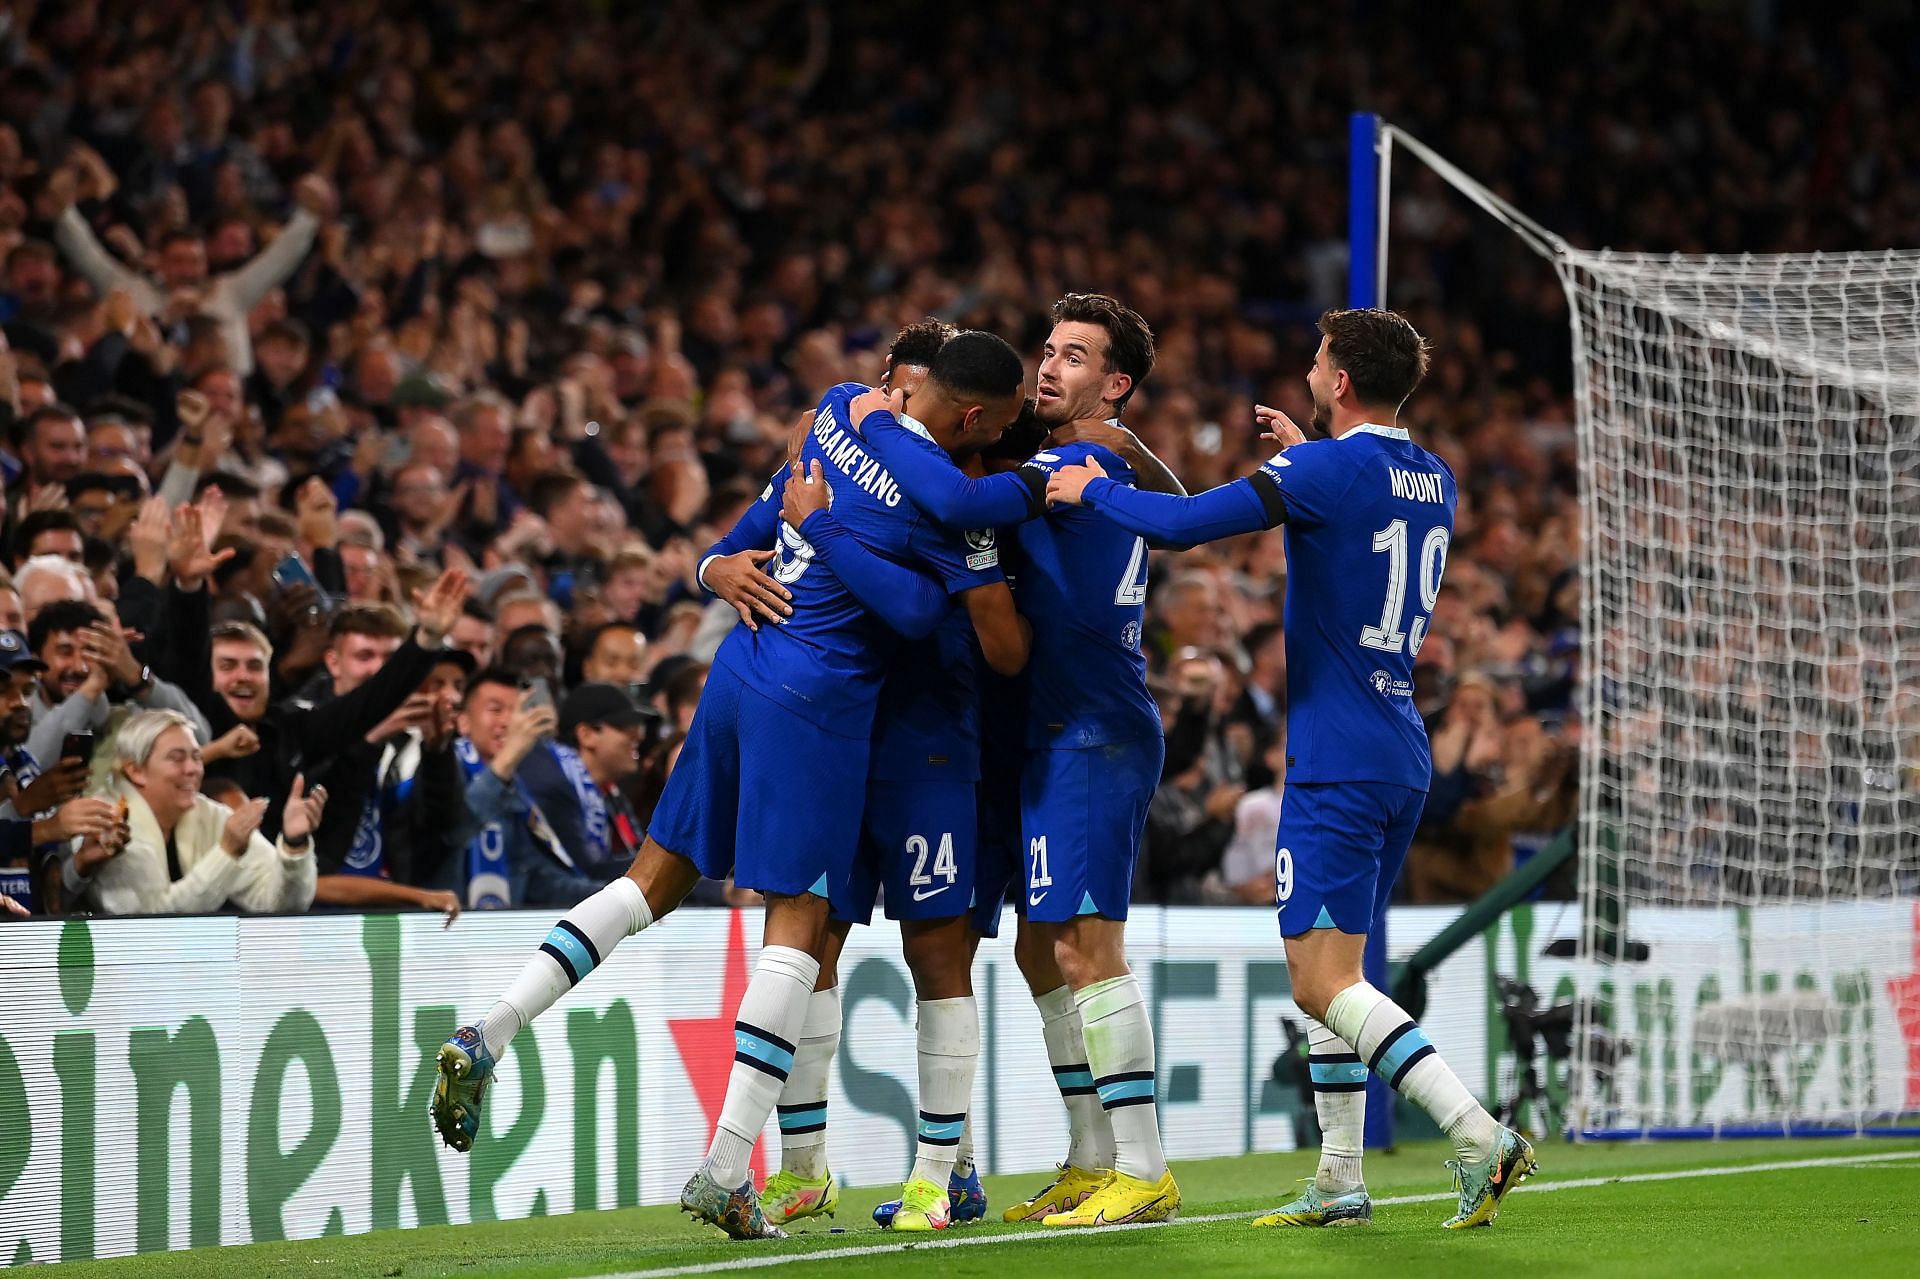 Chelsea have blown the qualification race open with a superb display on Wednesday